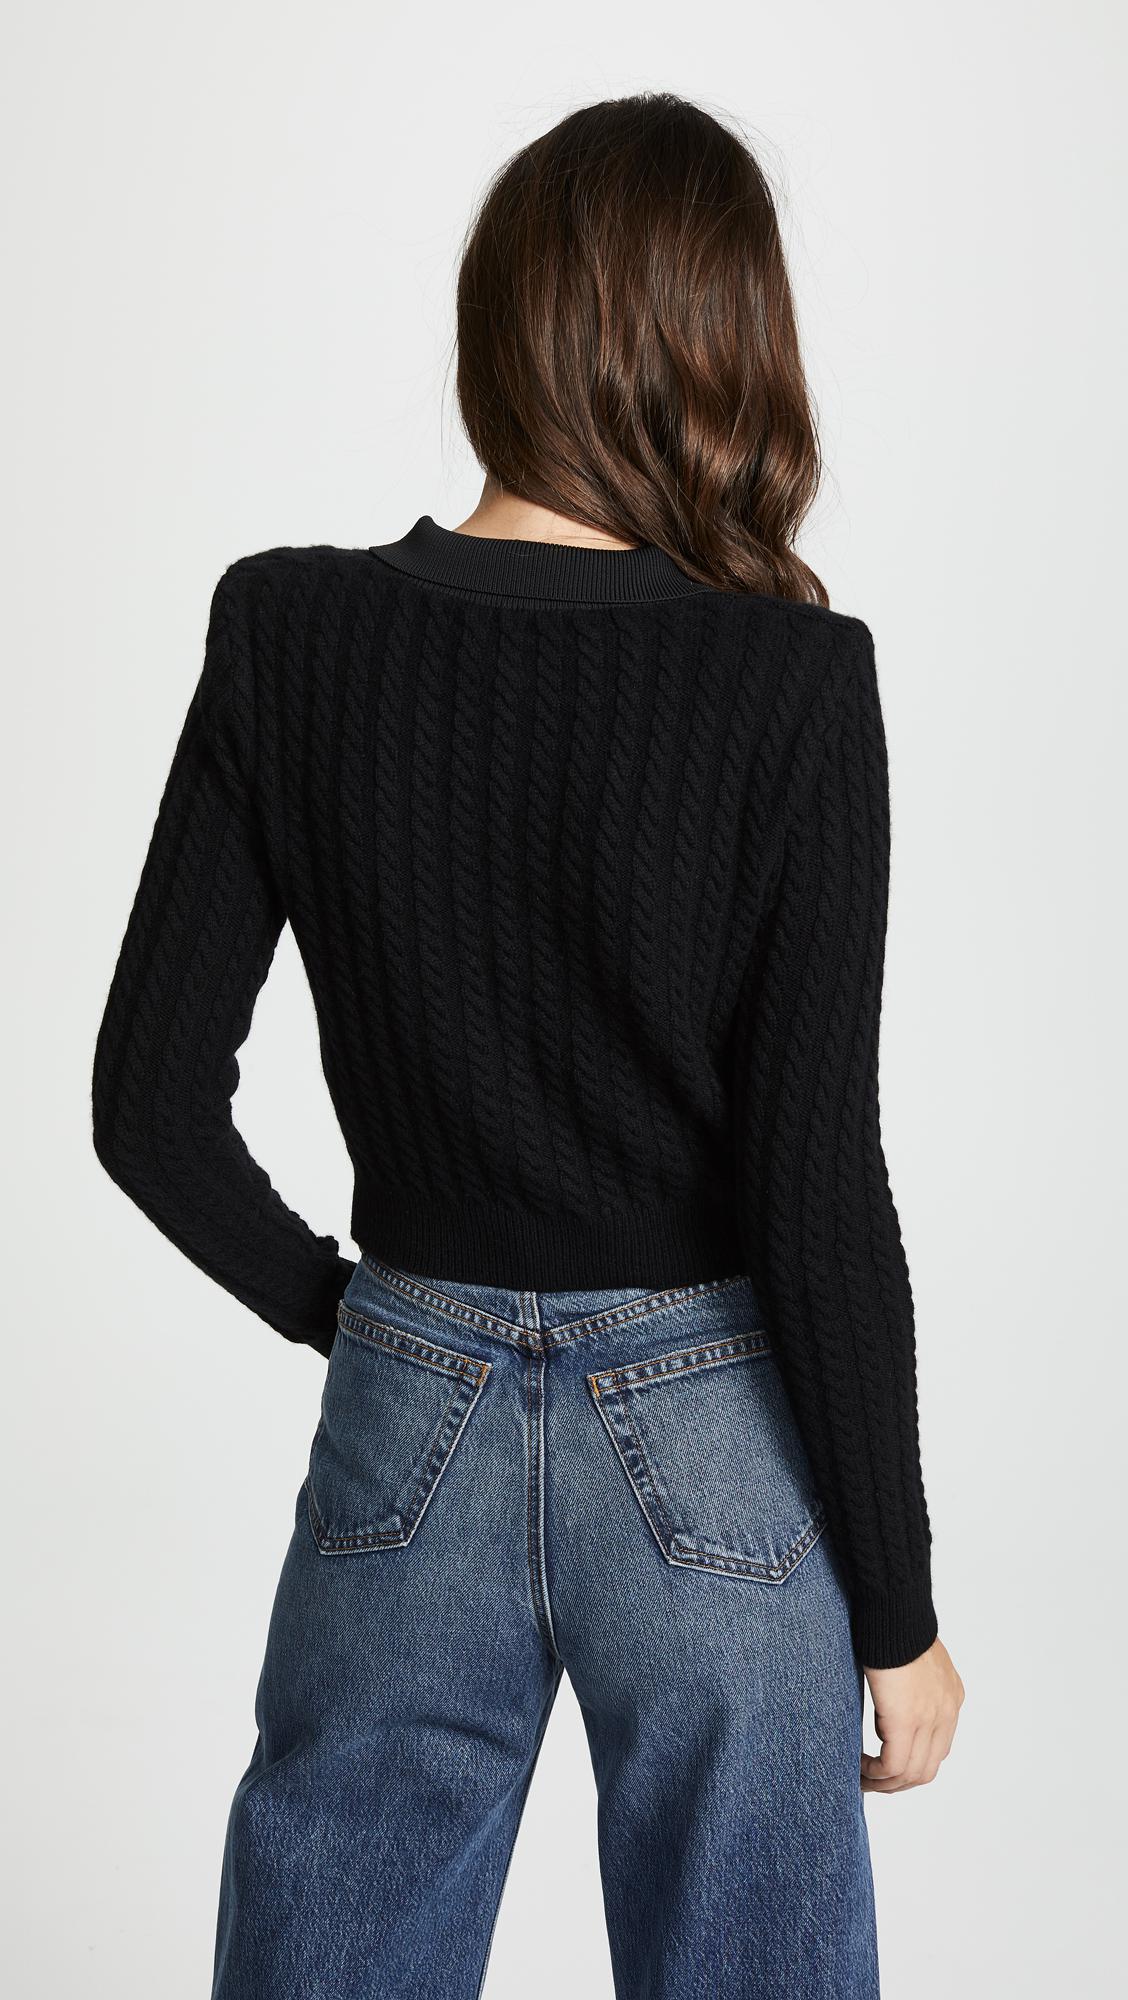 ShuShu/Tong Wool Cable Knit Cardigan in Black - Lyst